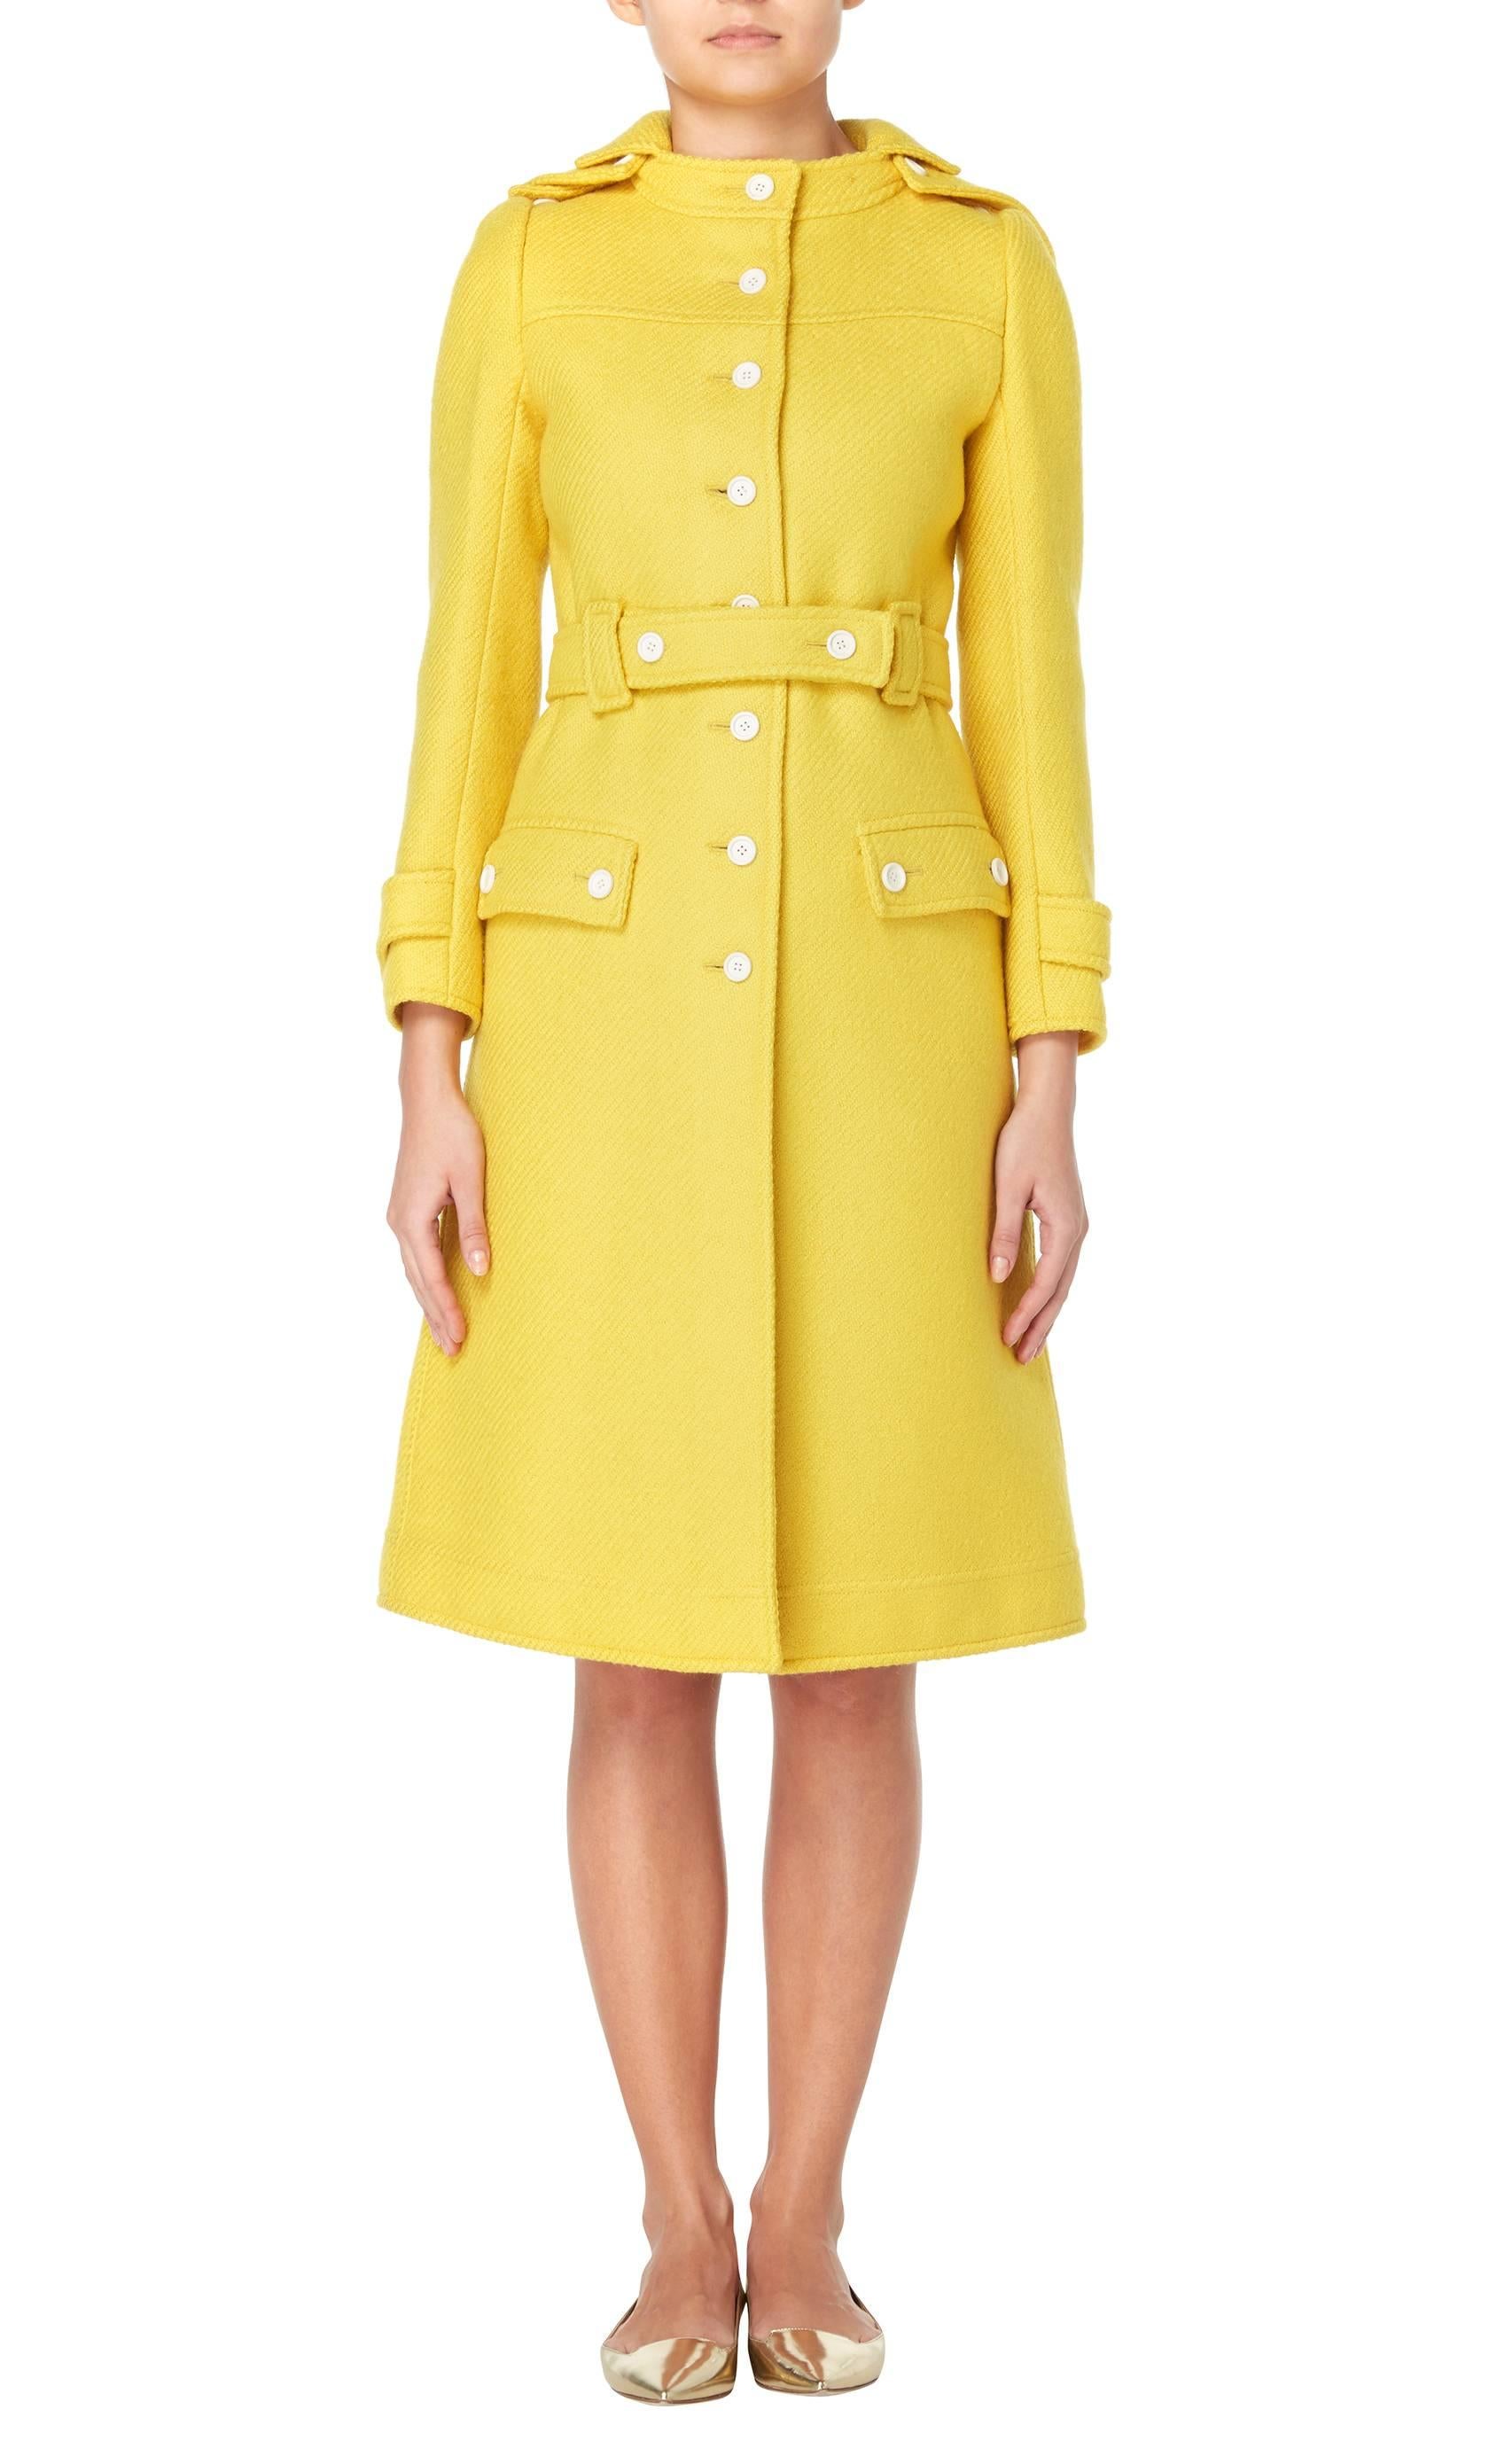 A great way of injecting some colour into a winter wardrobe, this amazing Courrèges coat will really make a statement. Constructed in canary yellow wool, the coat features a removable pointed hood and belt at the waist. With white plastic button